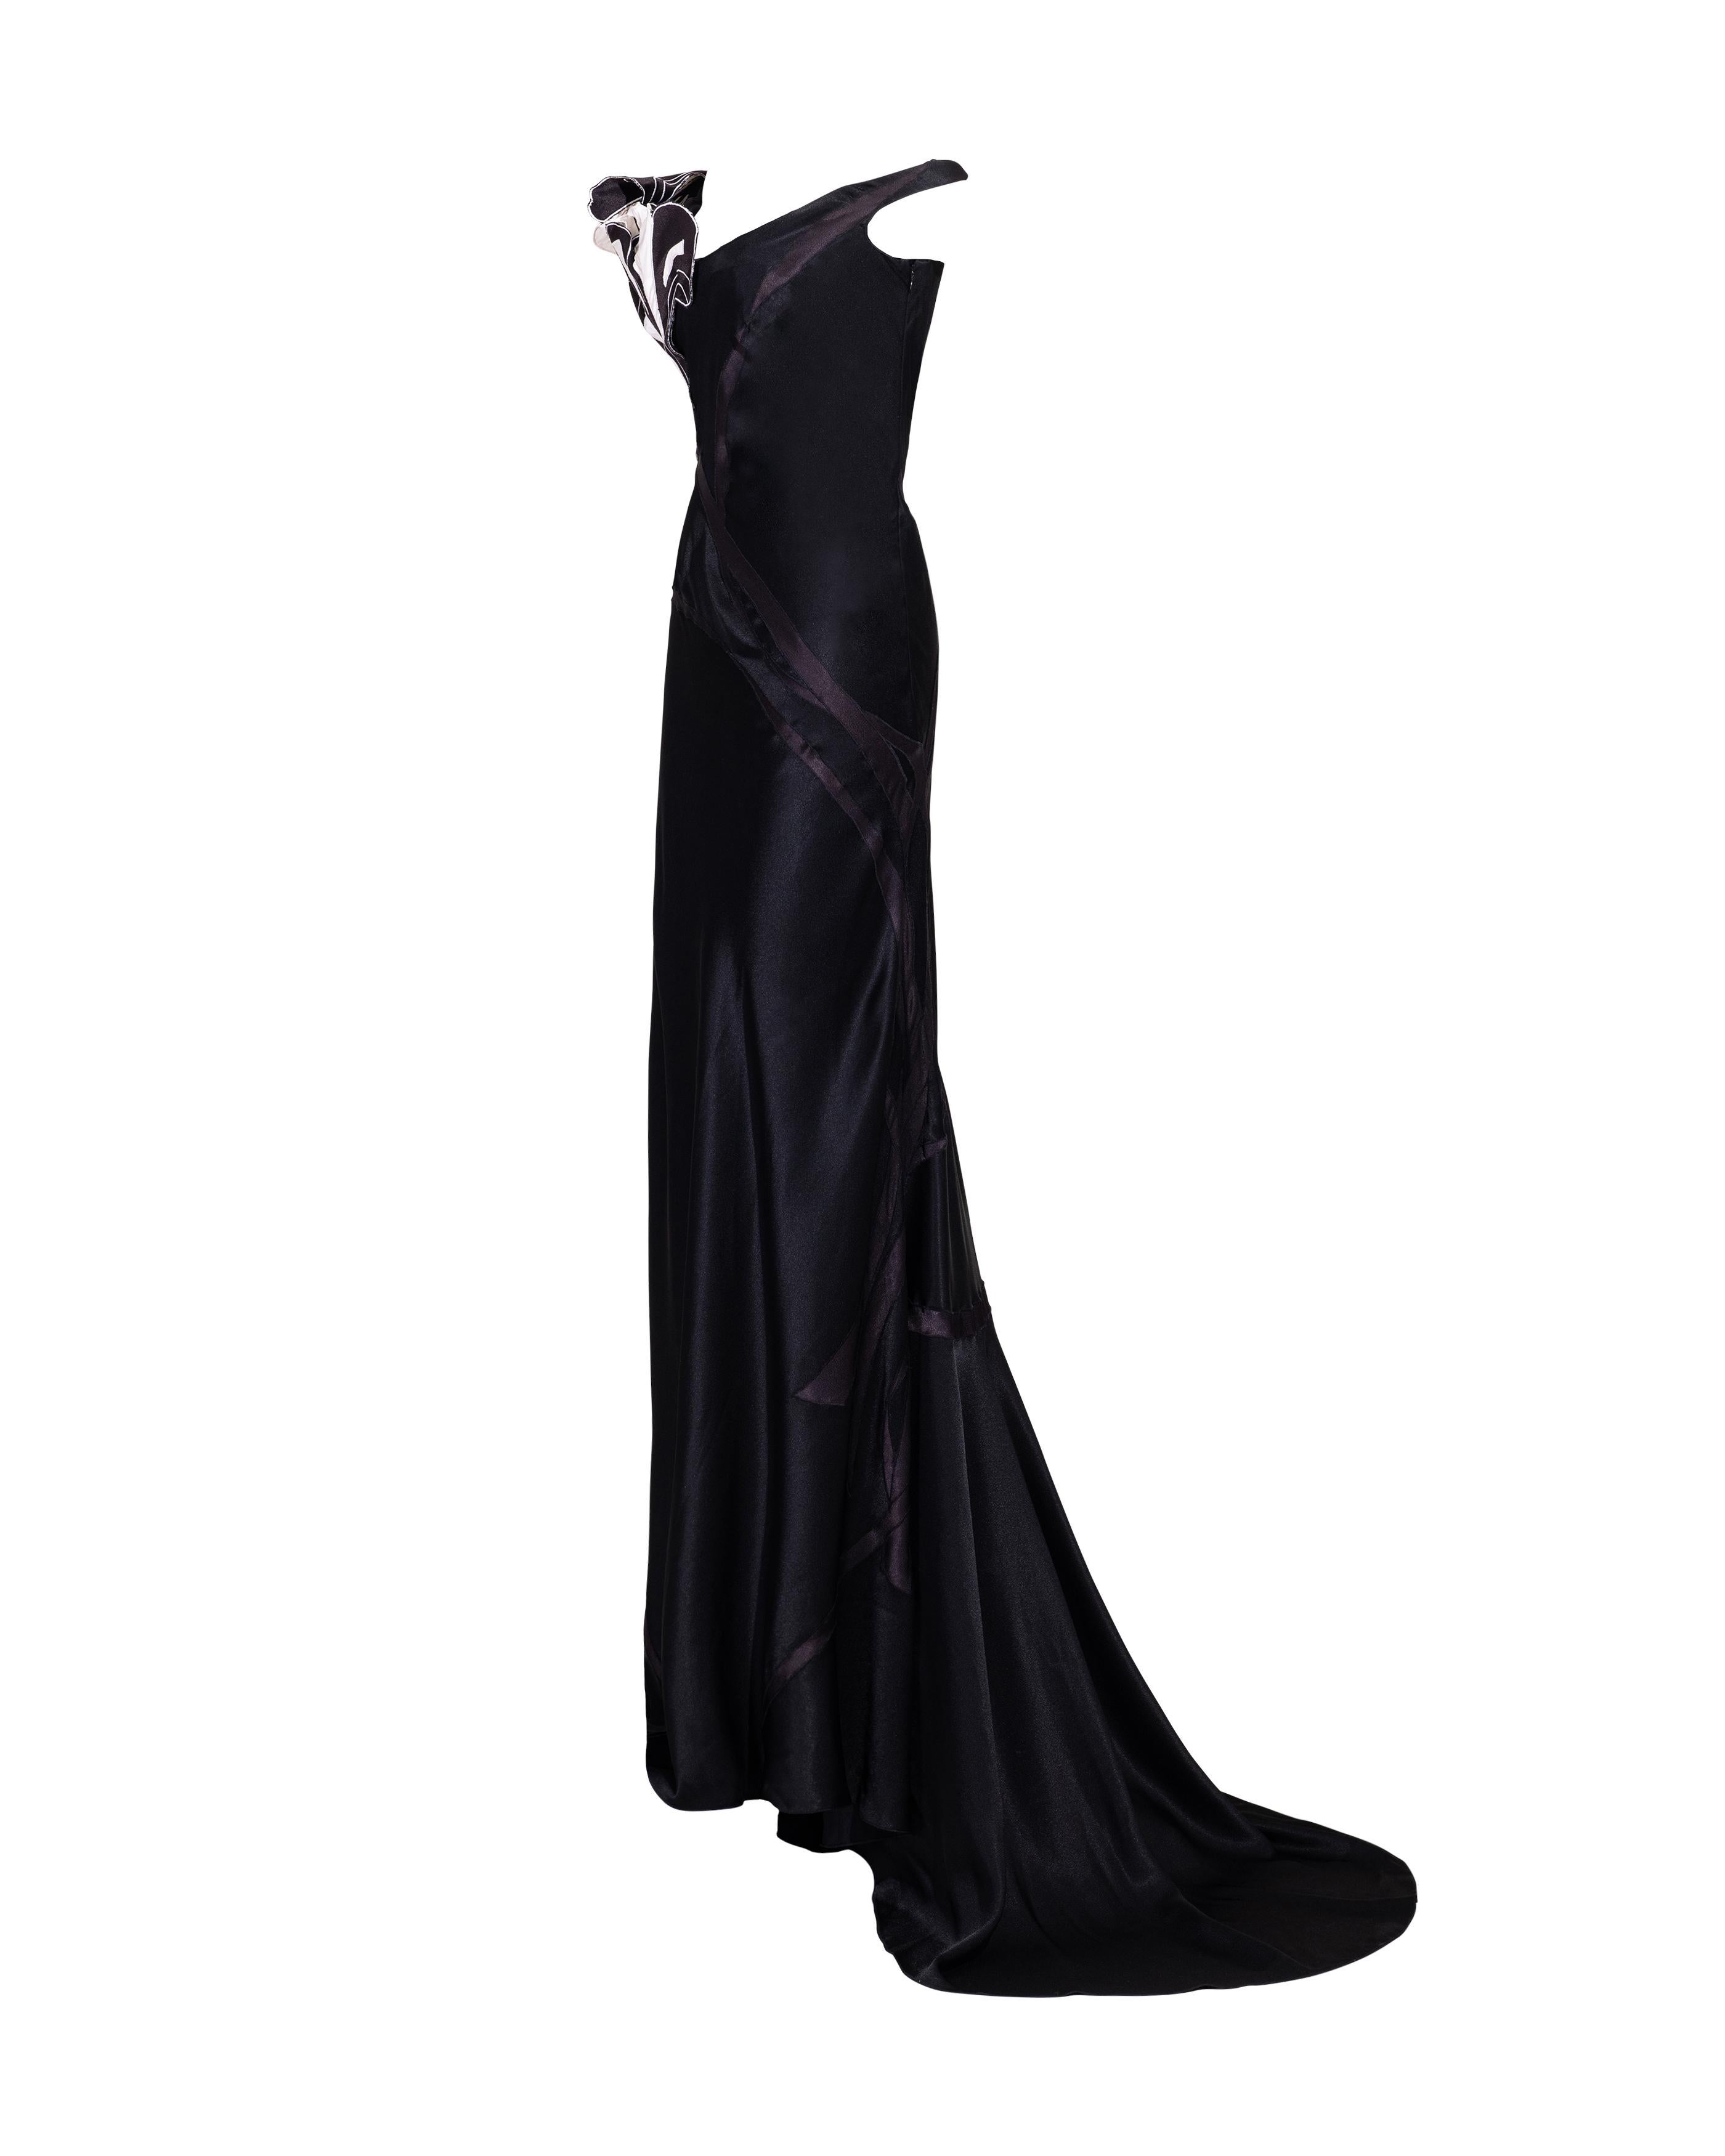 S/S 1996 John Galliano Black and White Sculptural Sleeve Gown with Train In Excellent Condition In North Hollywood, CA